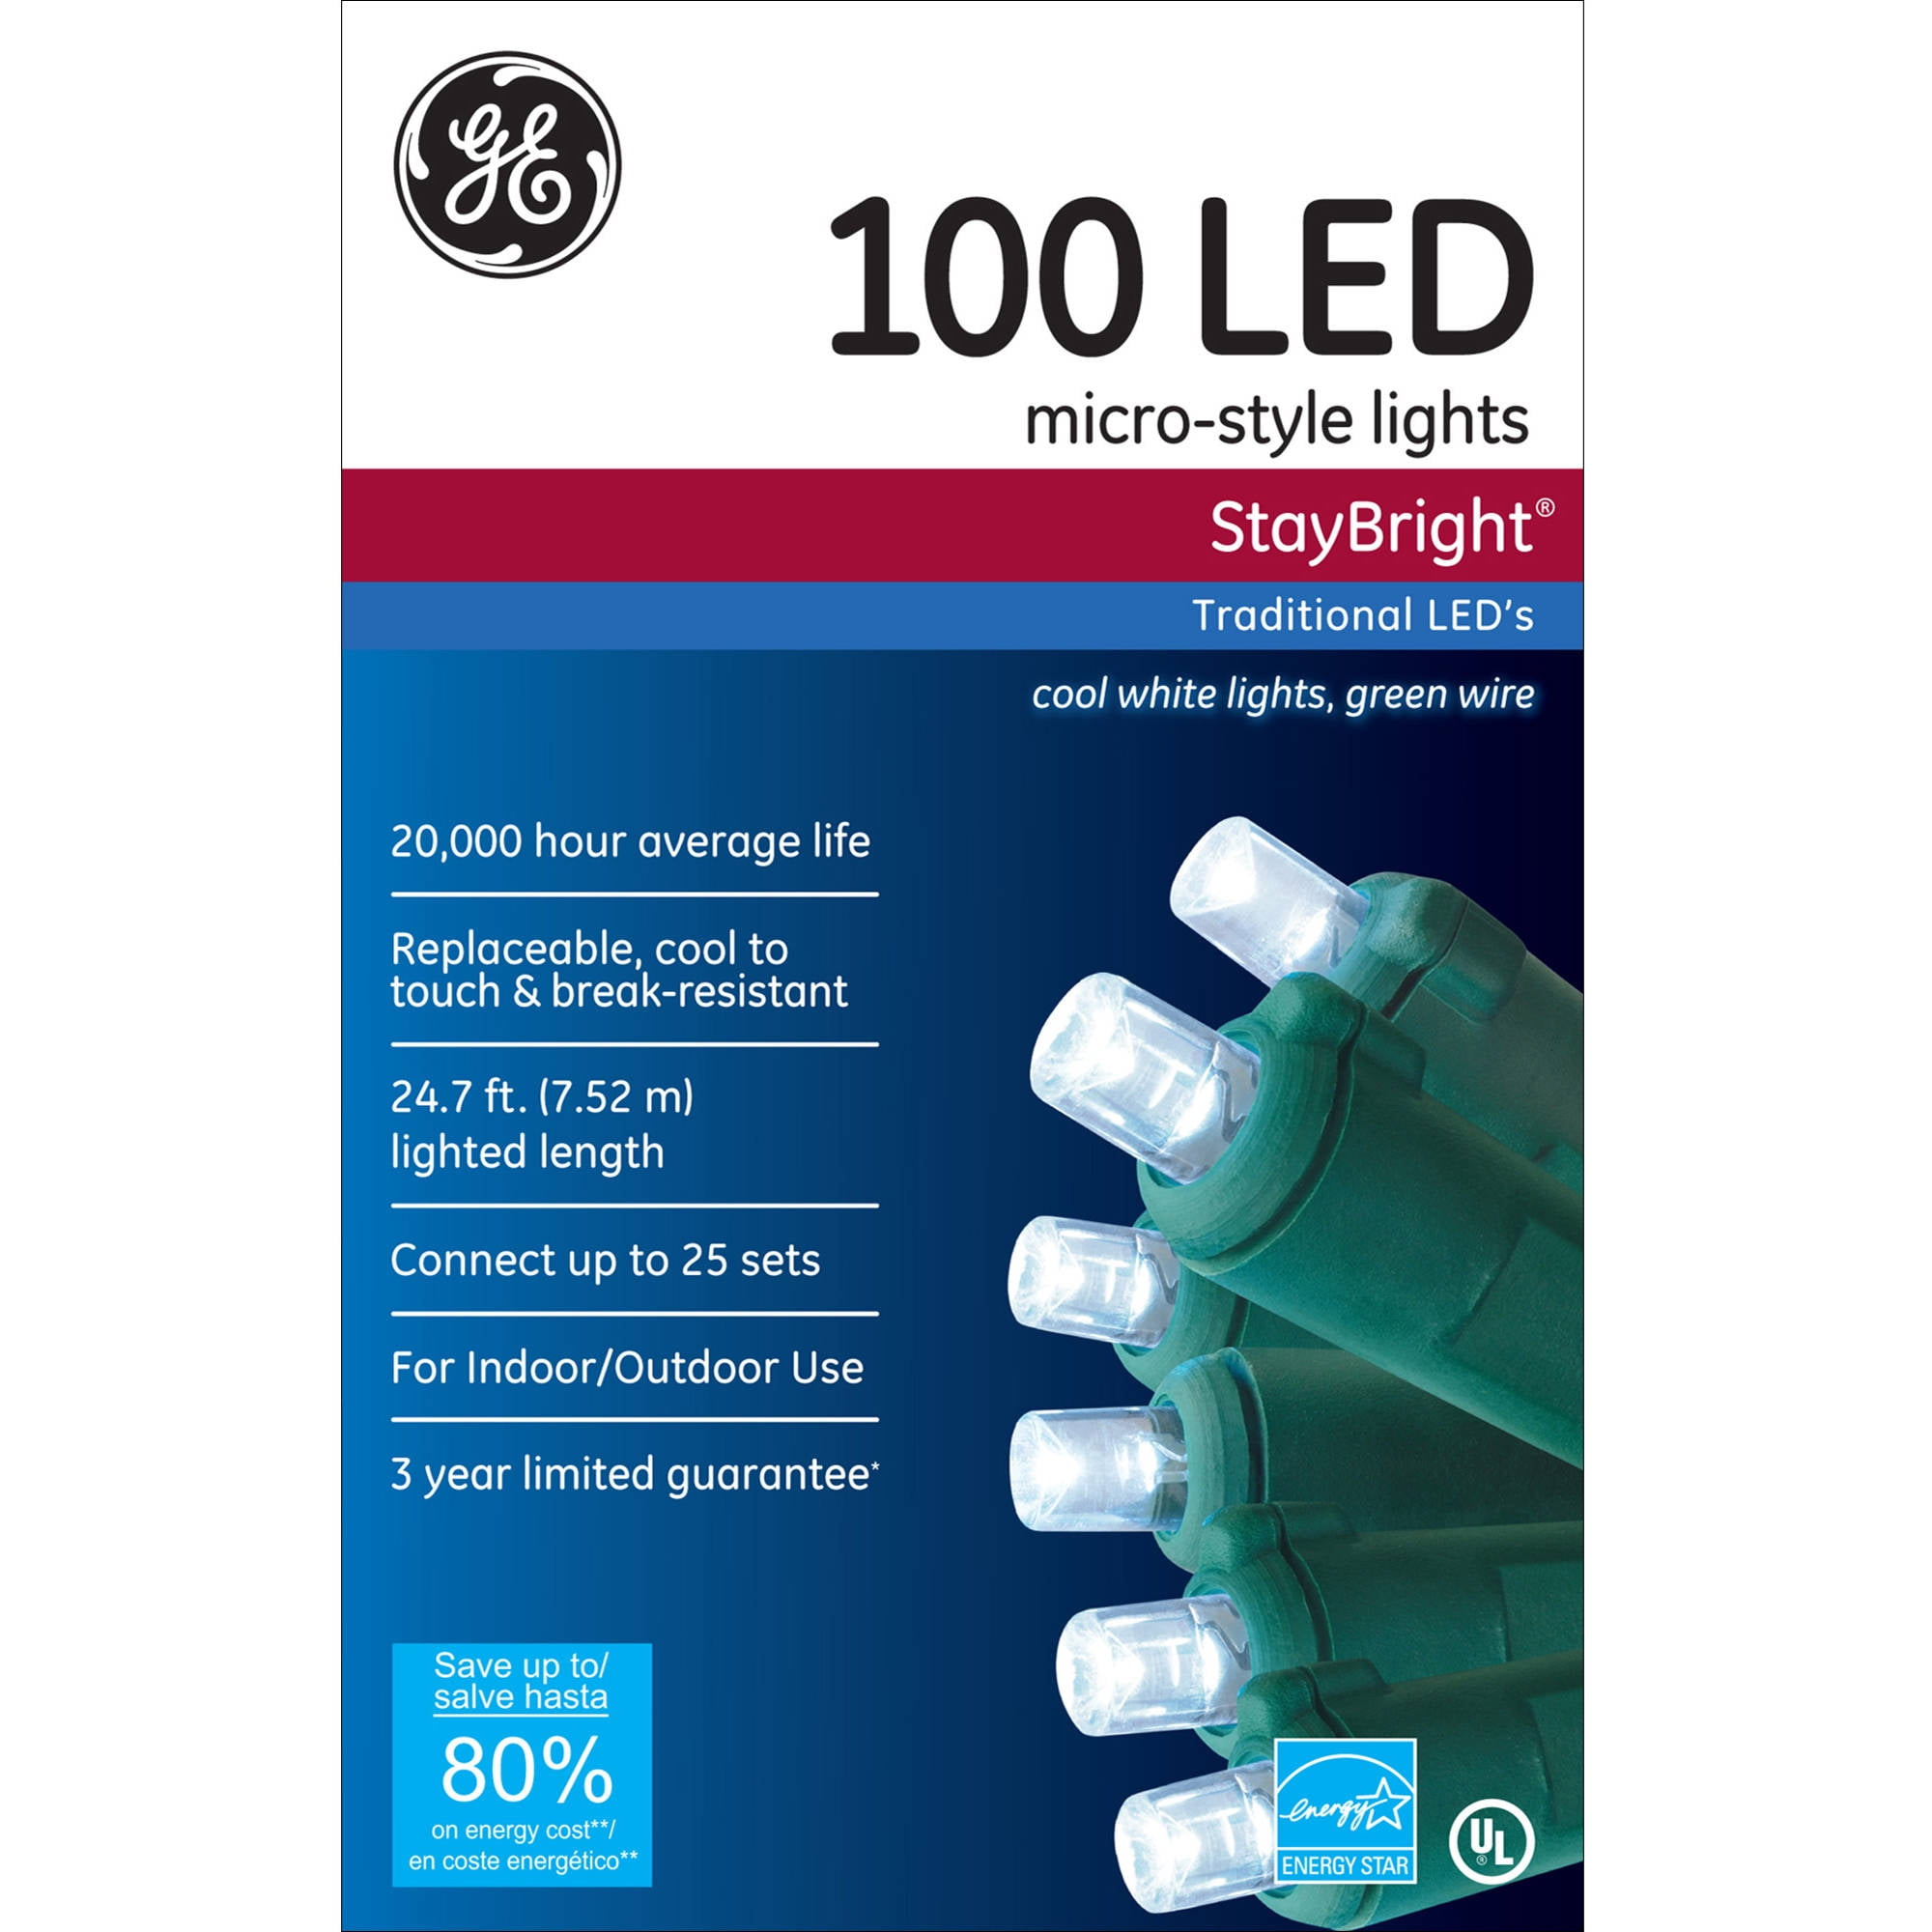 GE Micro-Style Lights 100 LED Staybright Cool White Green String 24.7 Ft NEW